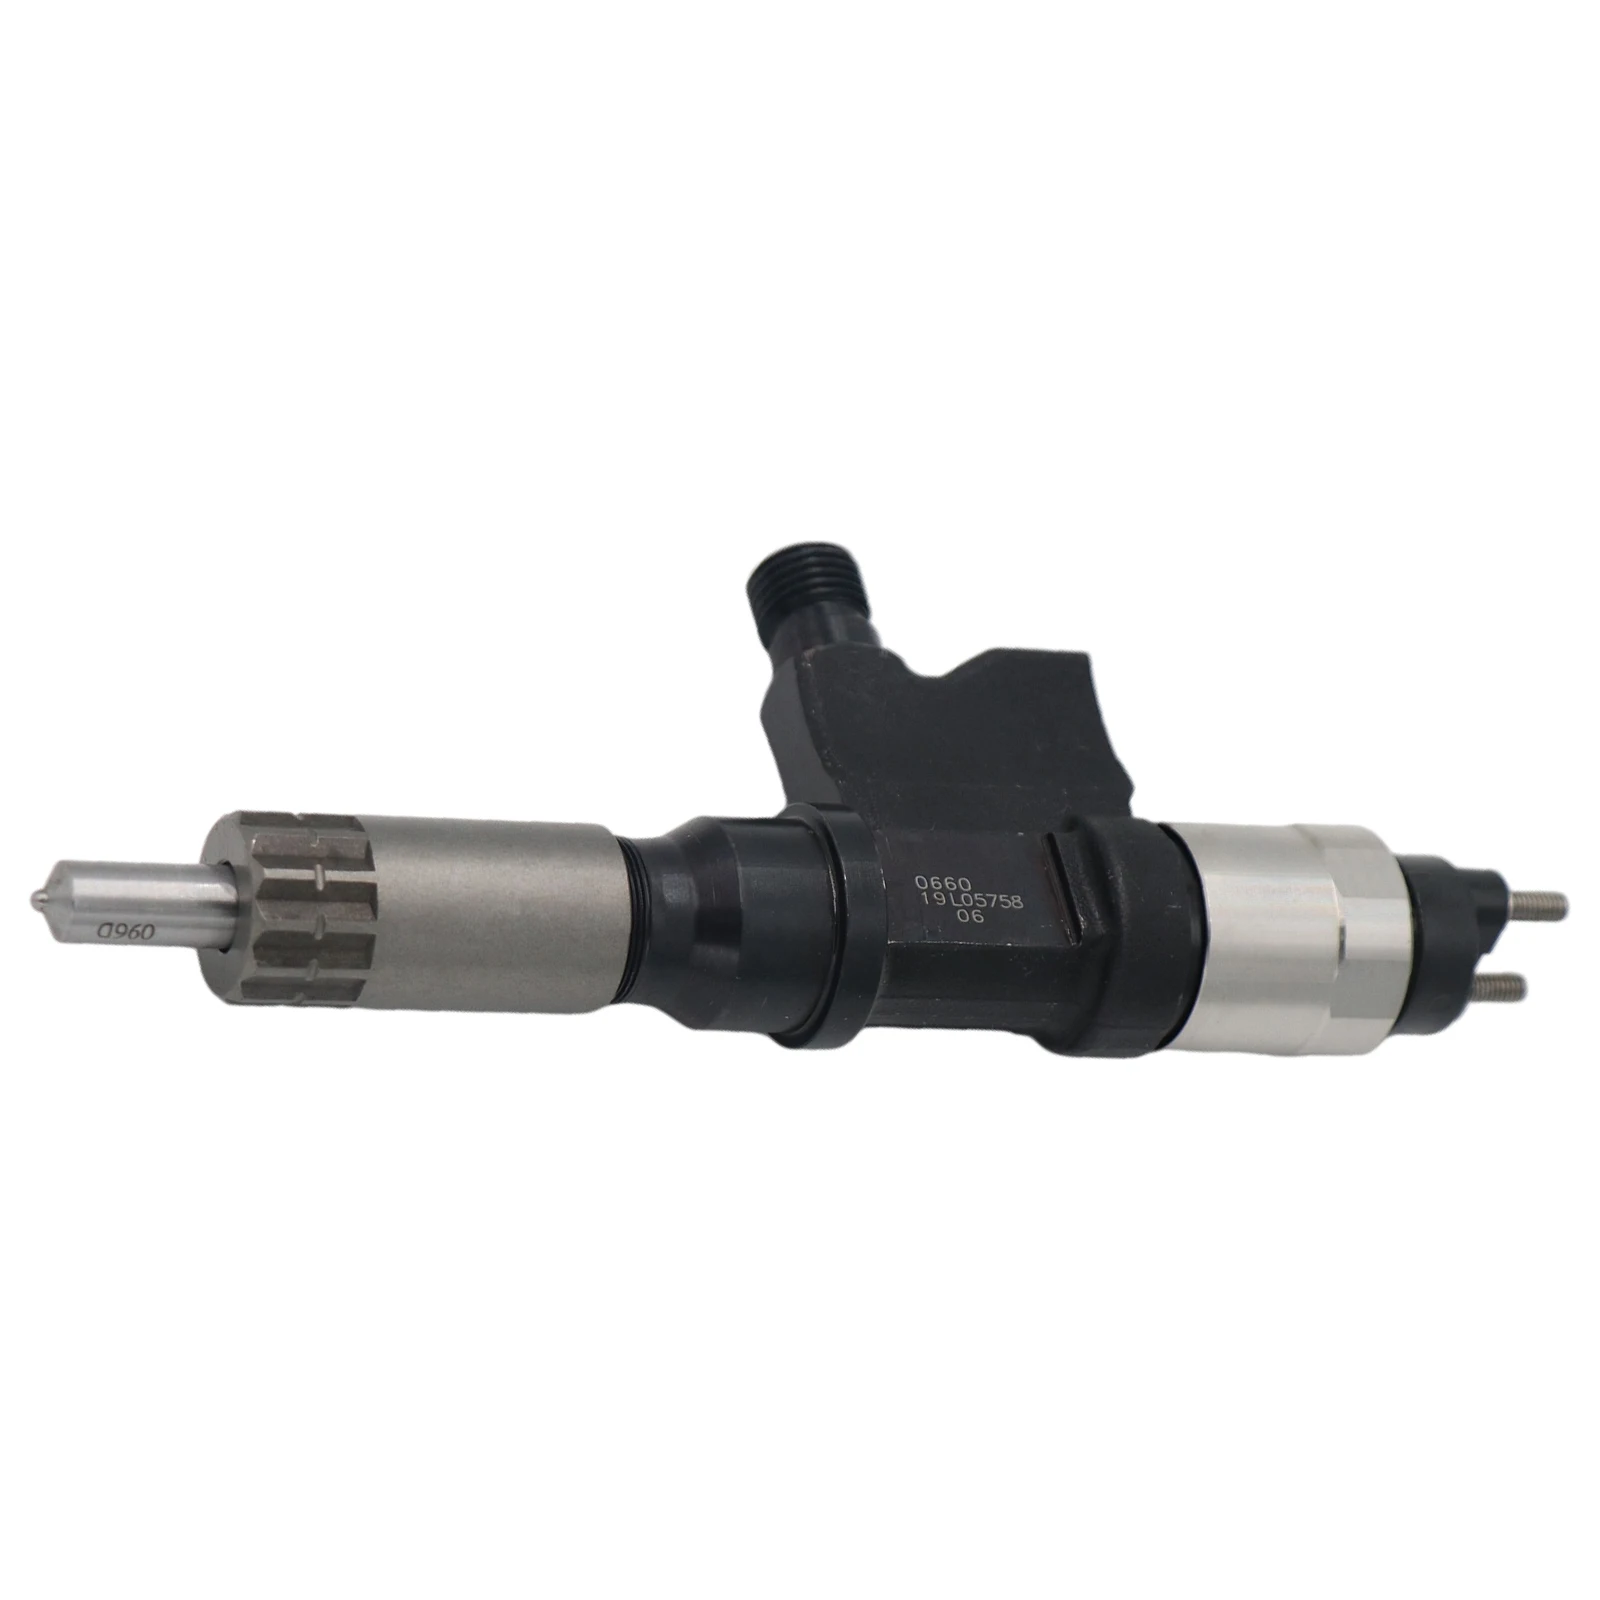 Fuel Injector Nozzle, Durable, Fits for Isuzu 4HK1 6HK1, Accessories Replace 095000-5471, Easy to Install